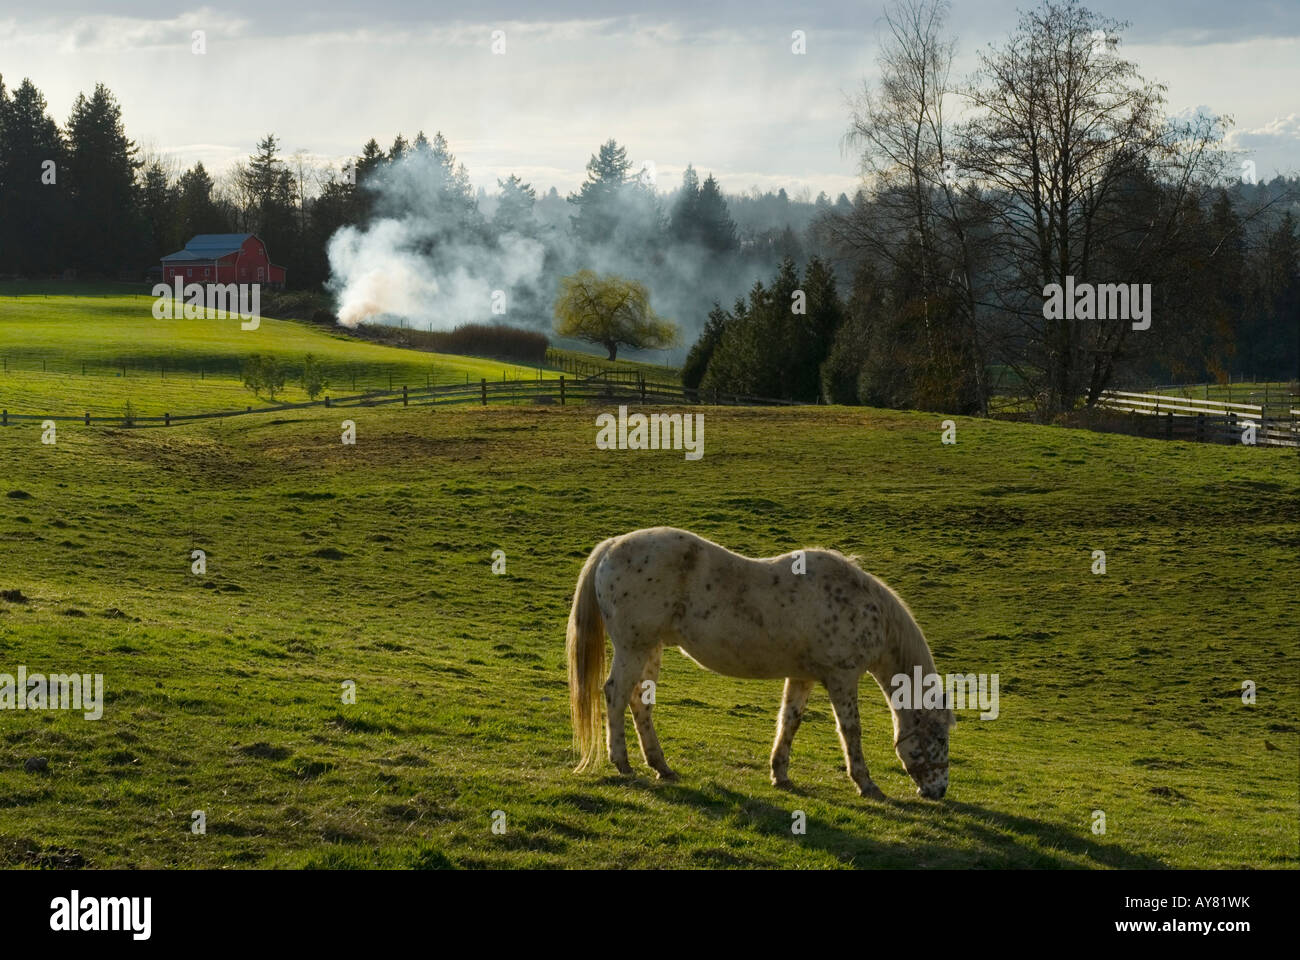 Horse grazing in a field with a small fire burning in the distance Stock Photo